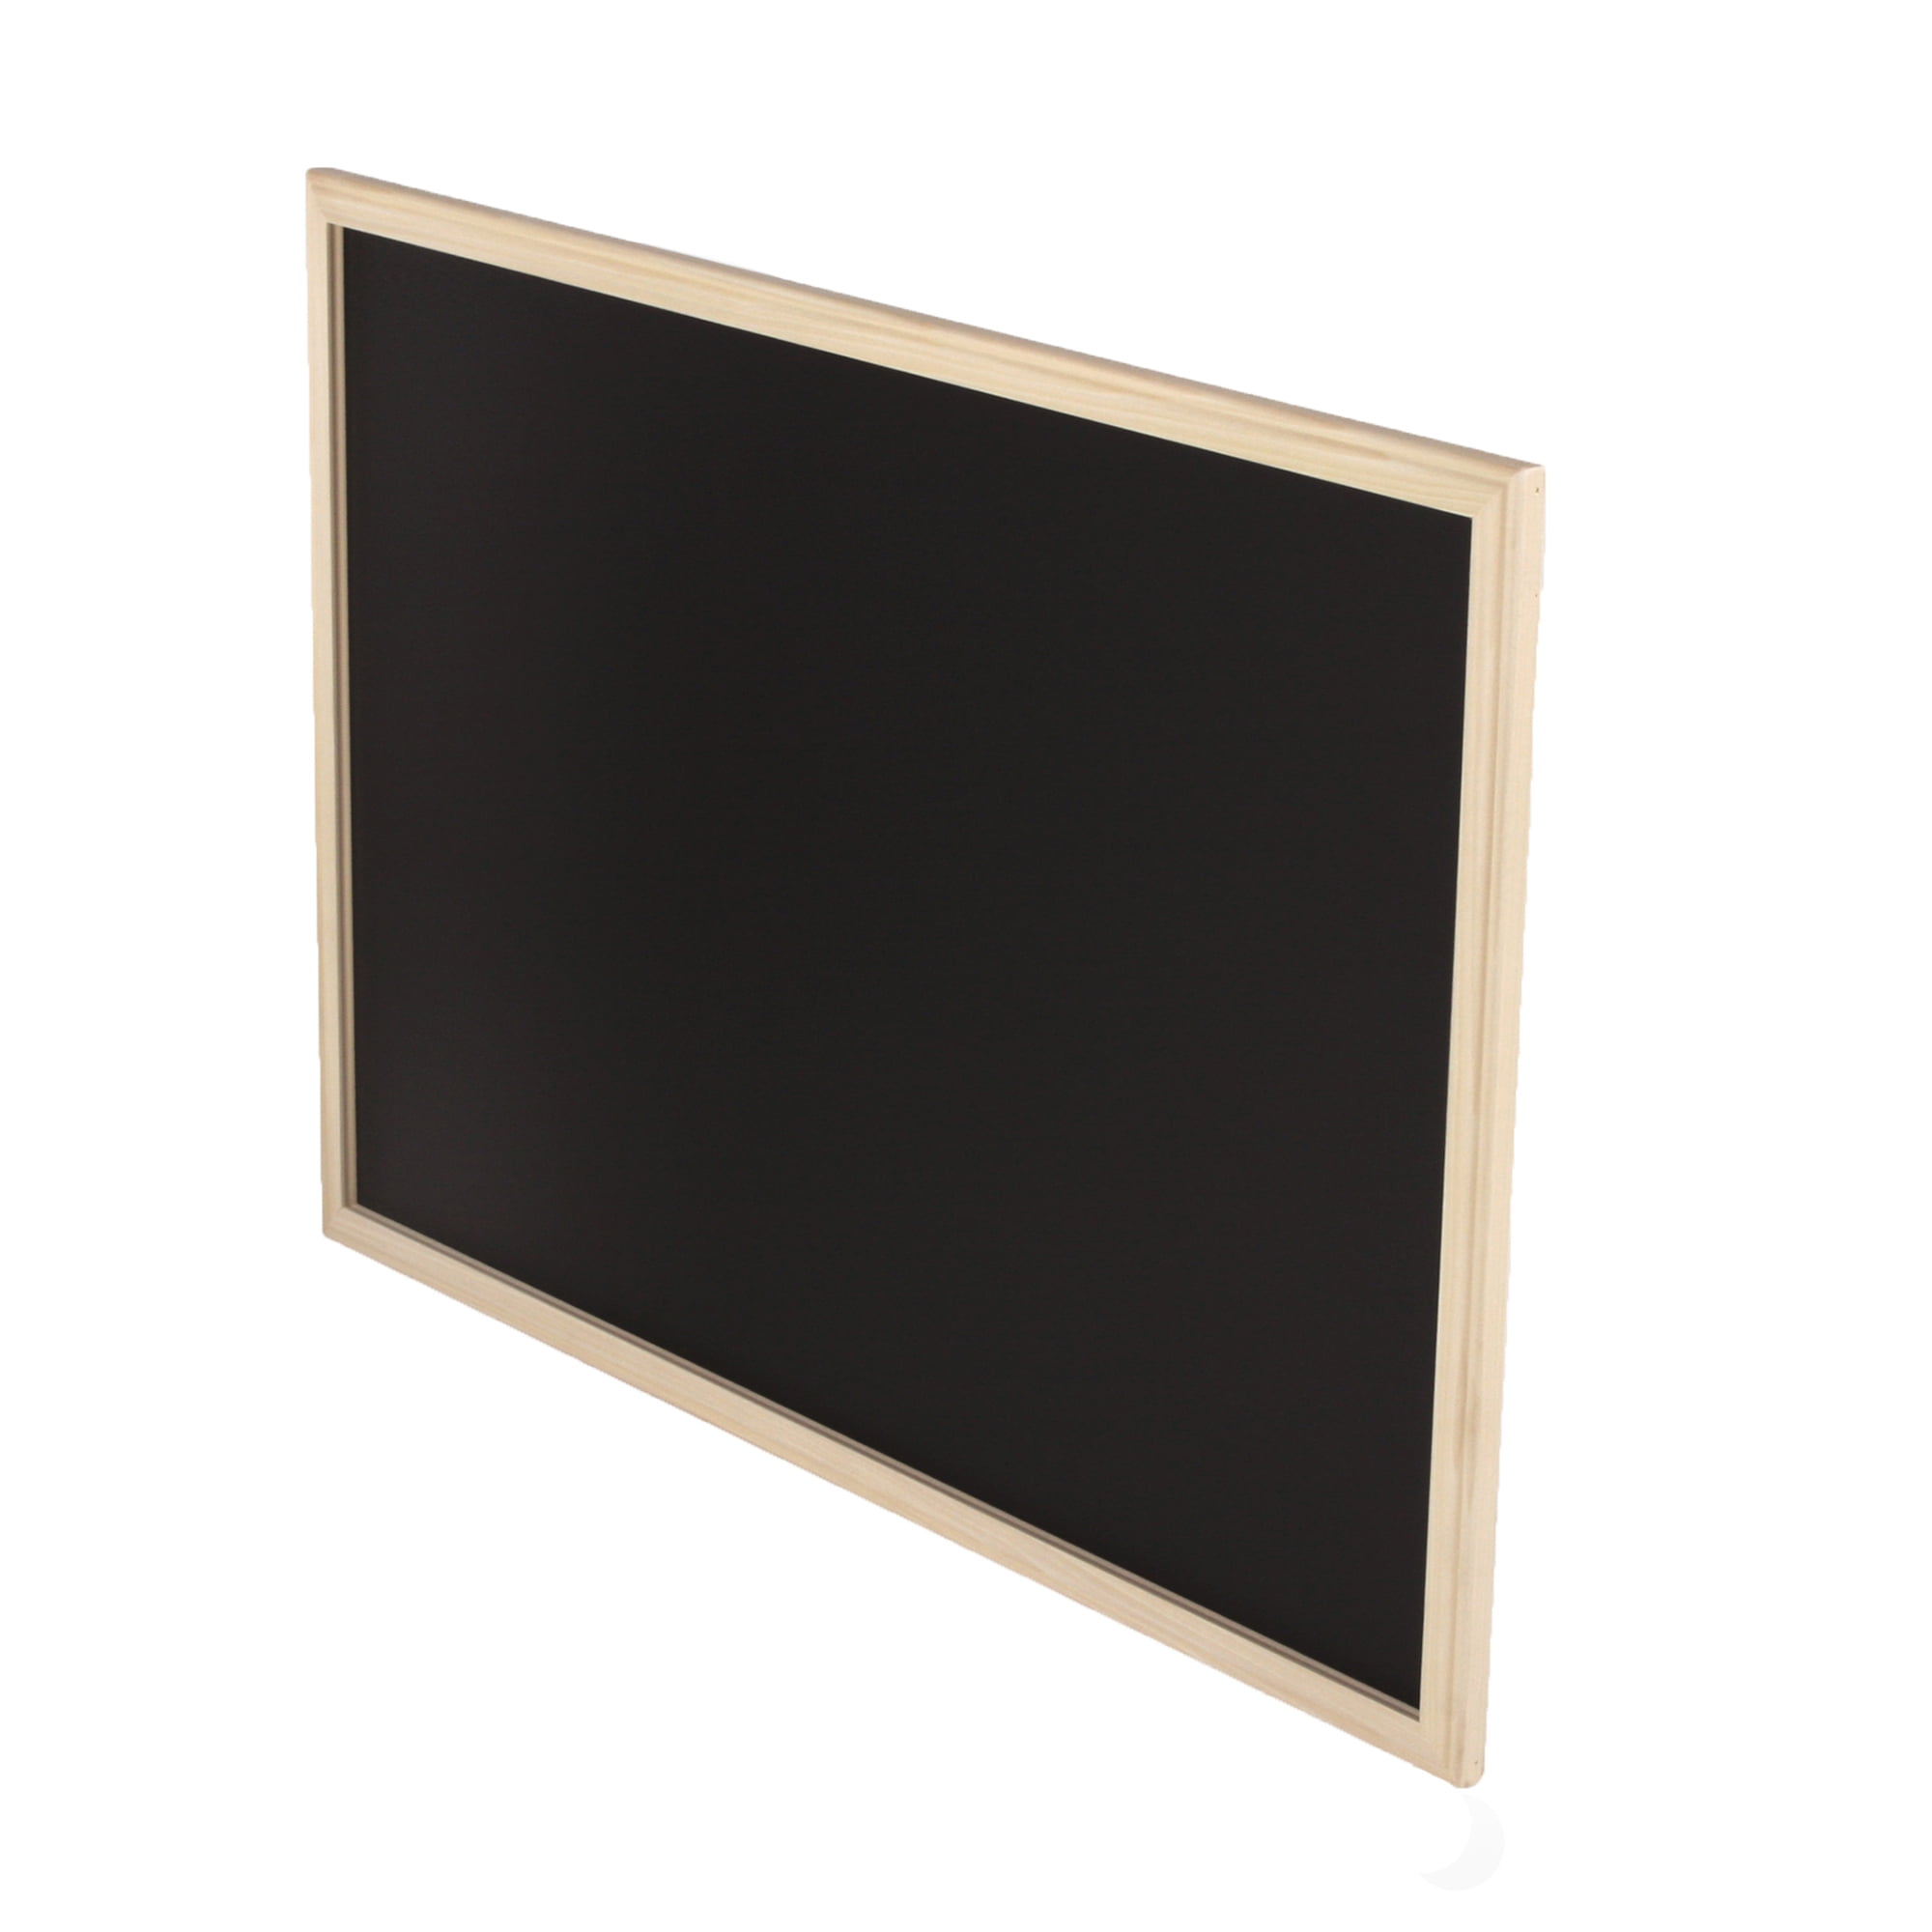  WoodWell Magnetic Black Chalk Board 18 x 24 (18 Inch x 24  Inch) Wood Framed Blackboard with Reinforced Metal Backing (Light Tone 18  X 24) : Office Products